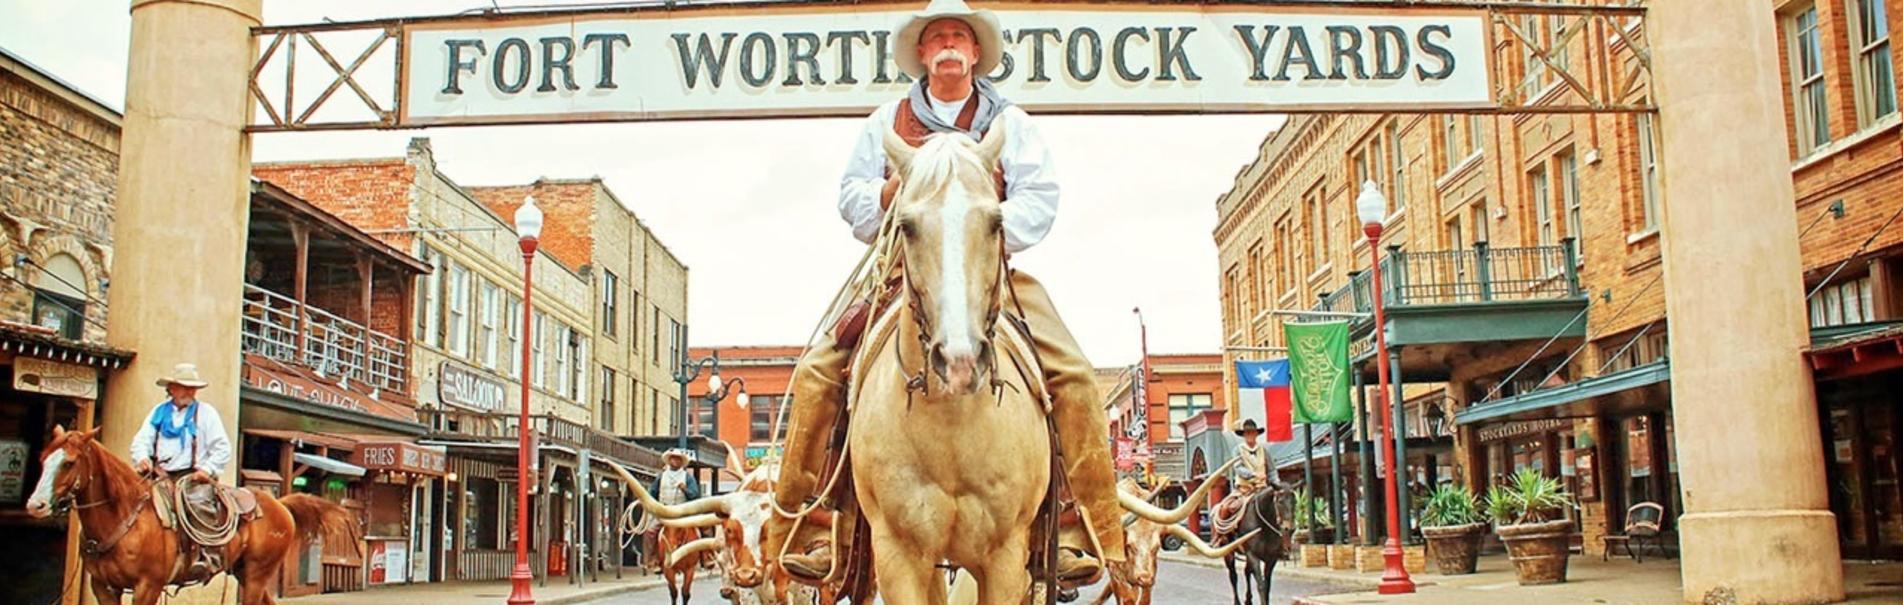 Cowboy At The Stockyards